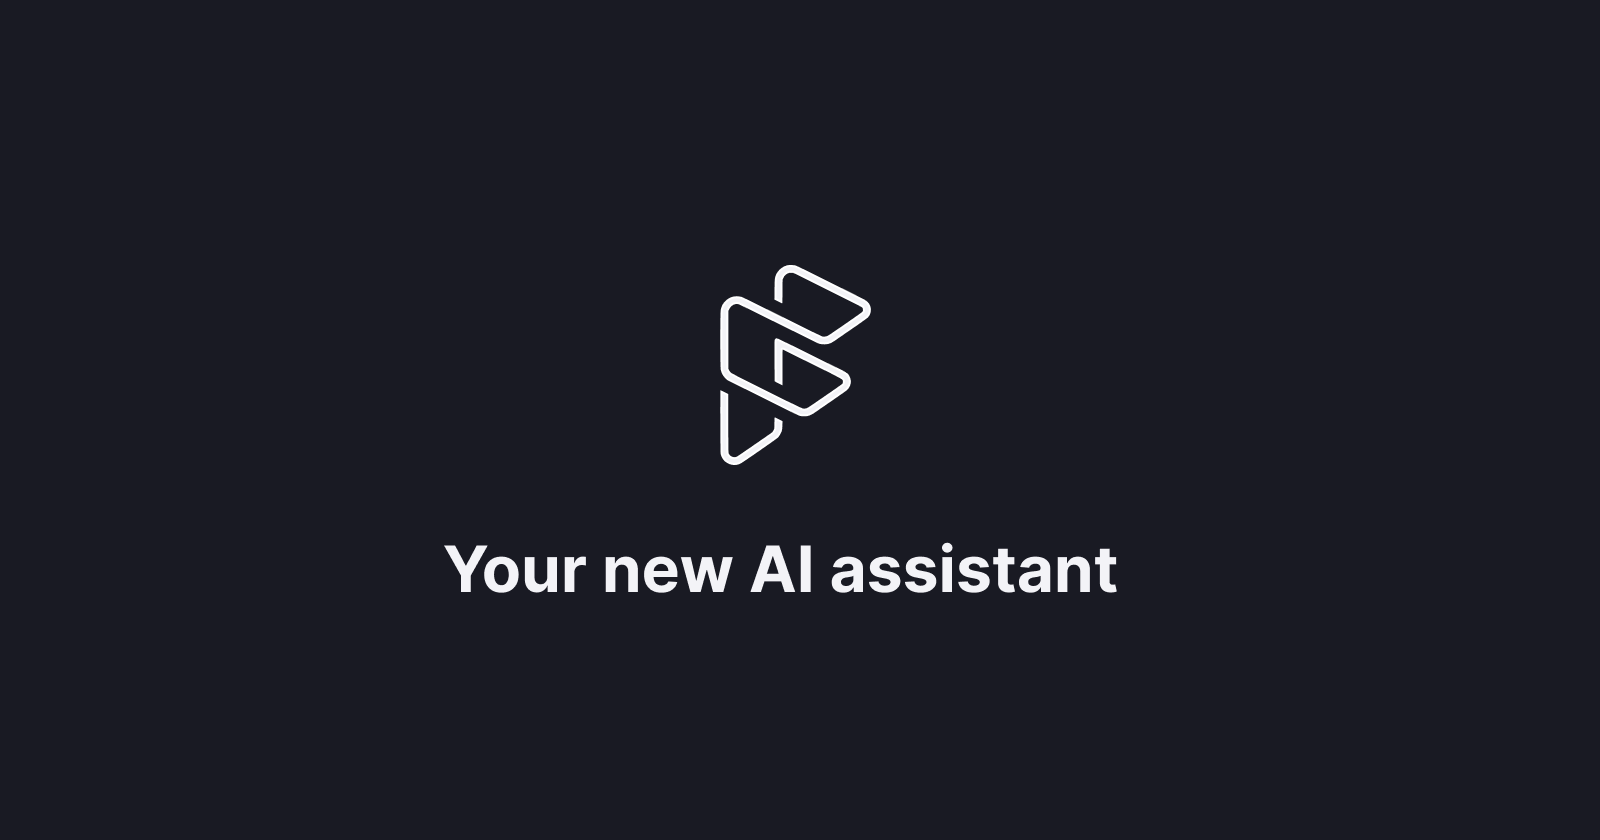 Forefront: Your new AI assistant